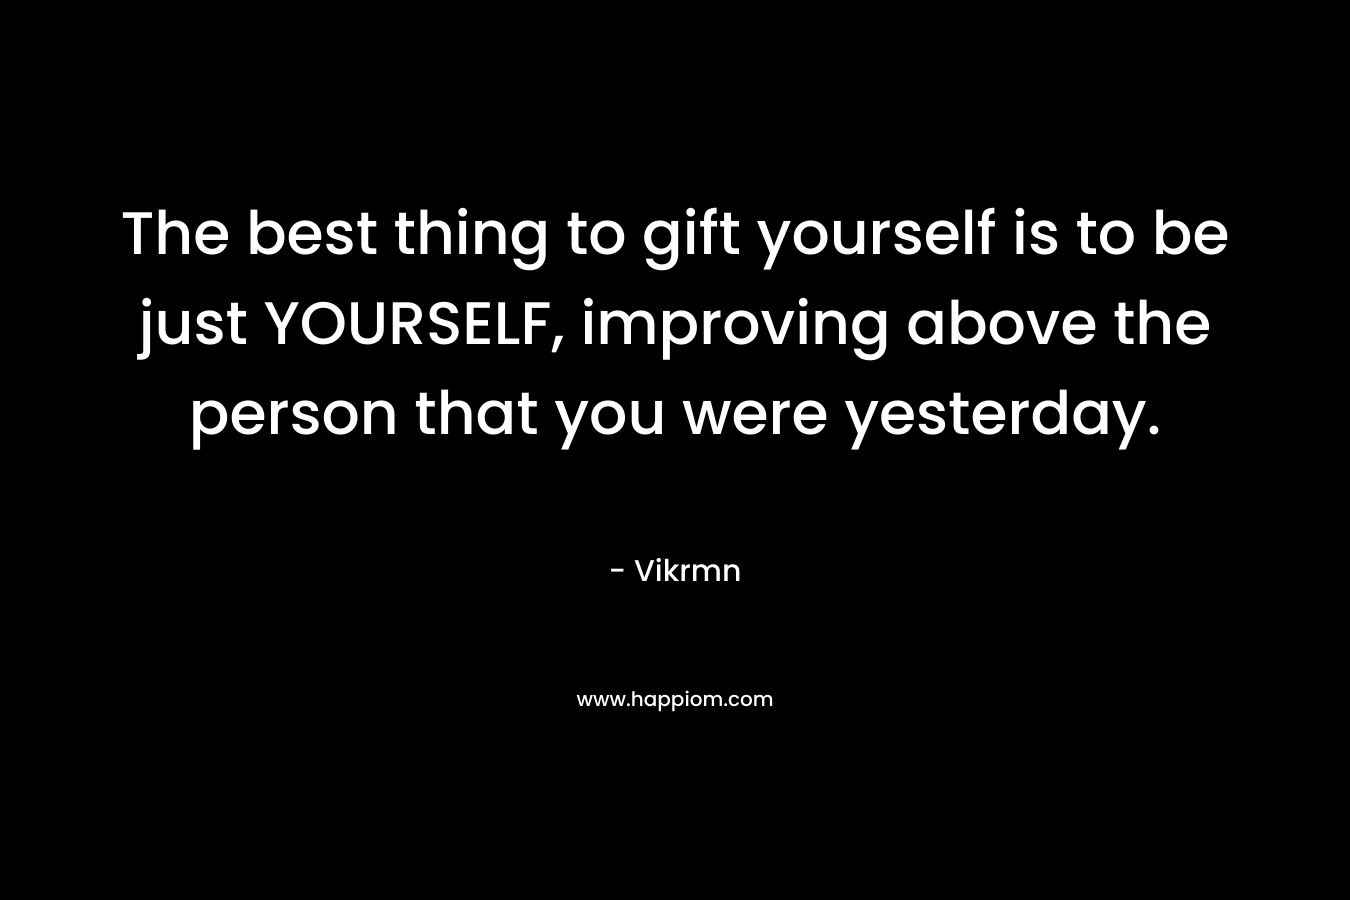 The best thing to gift yourself is to be just YOURSELF, improving above the person that you were yesterday.